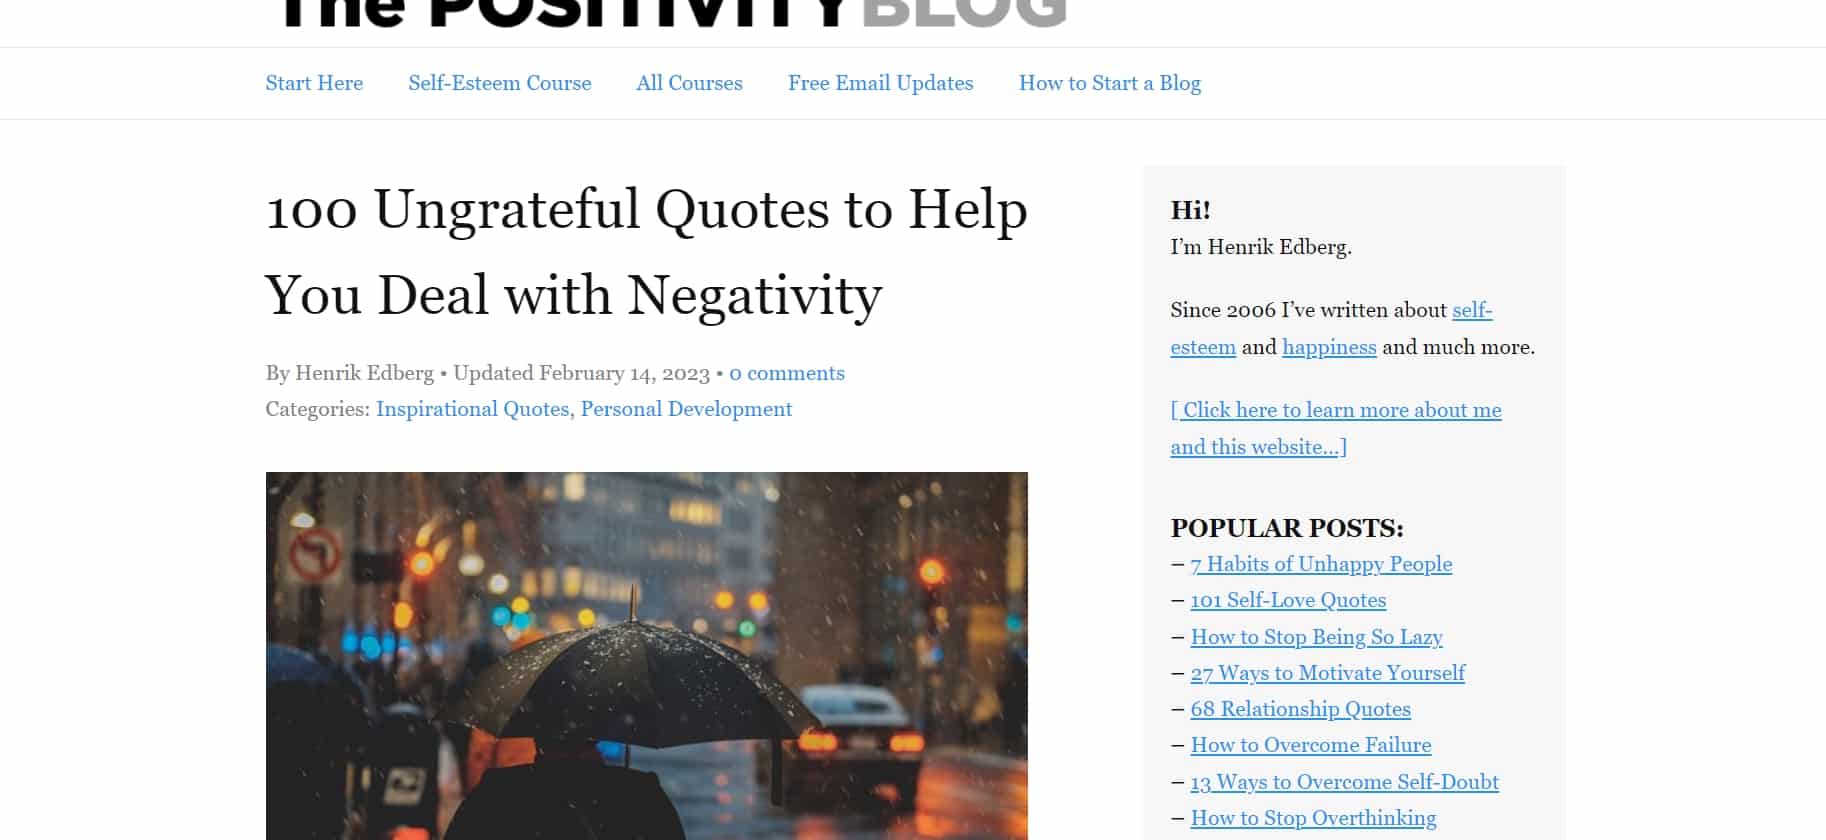 positivity blog page example